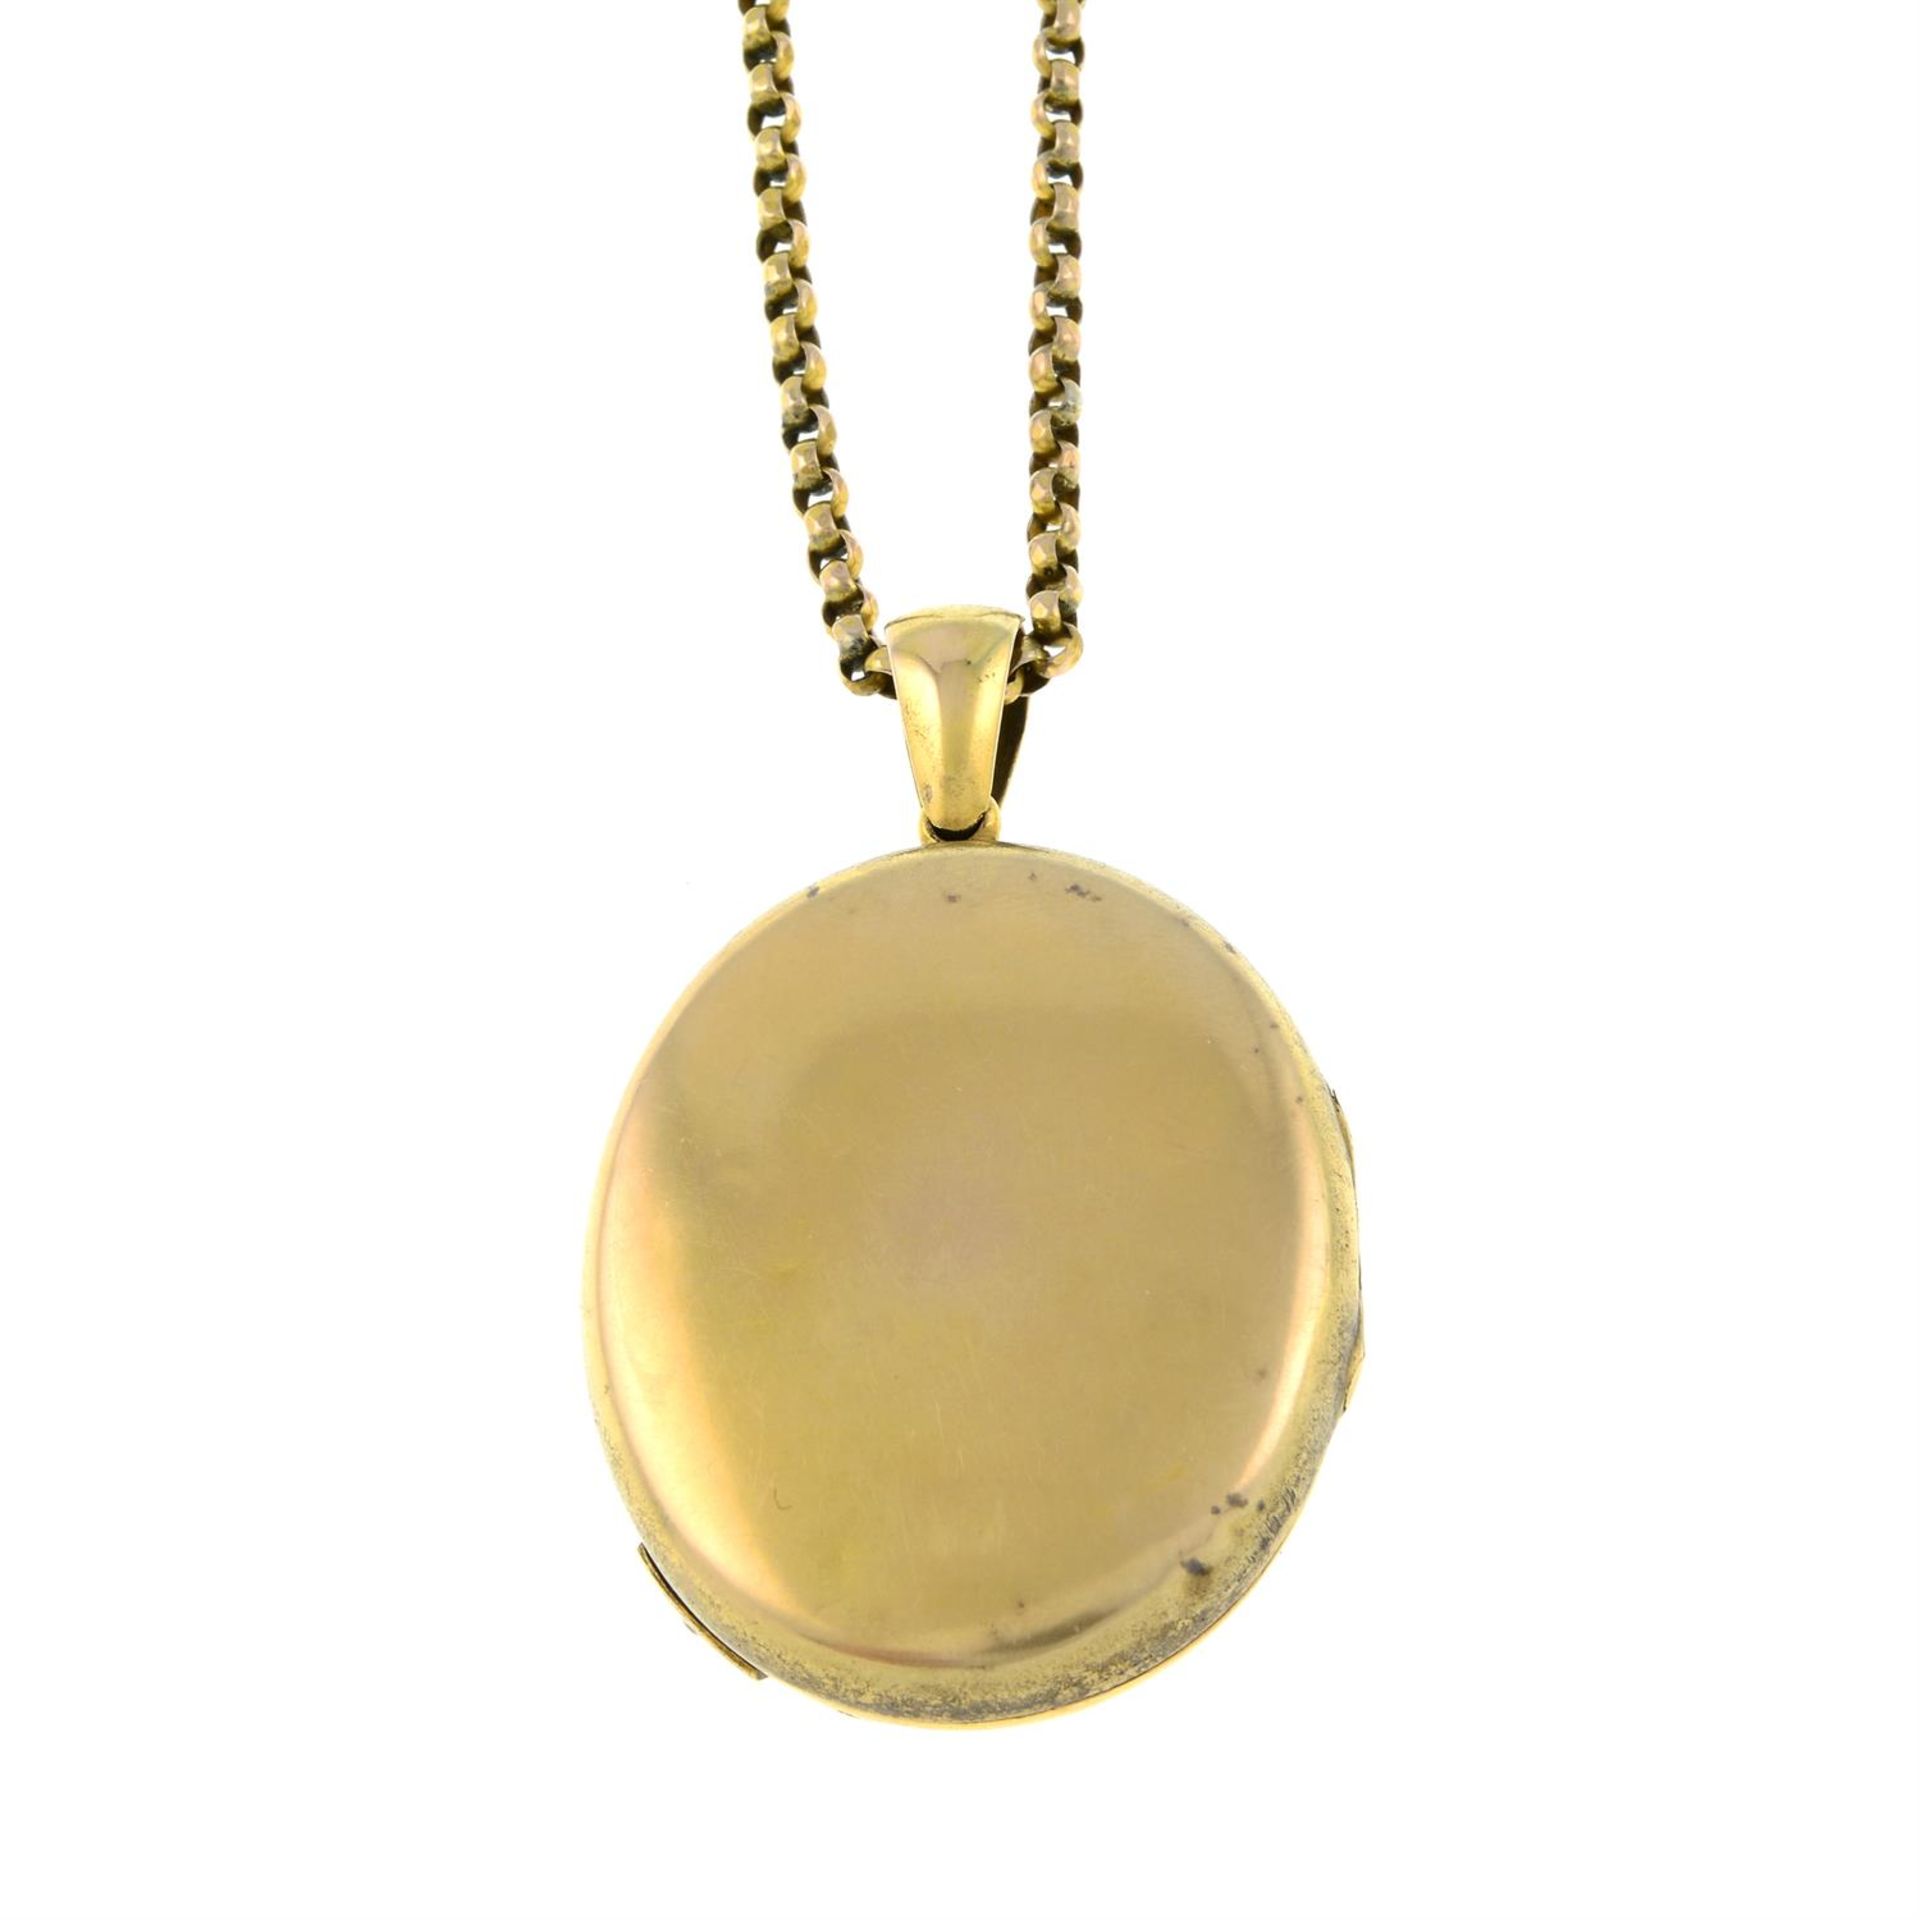 An early 20th century gold split pearl locket pendant, with chain. - Image 2 of 3